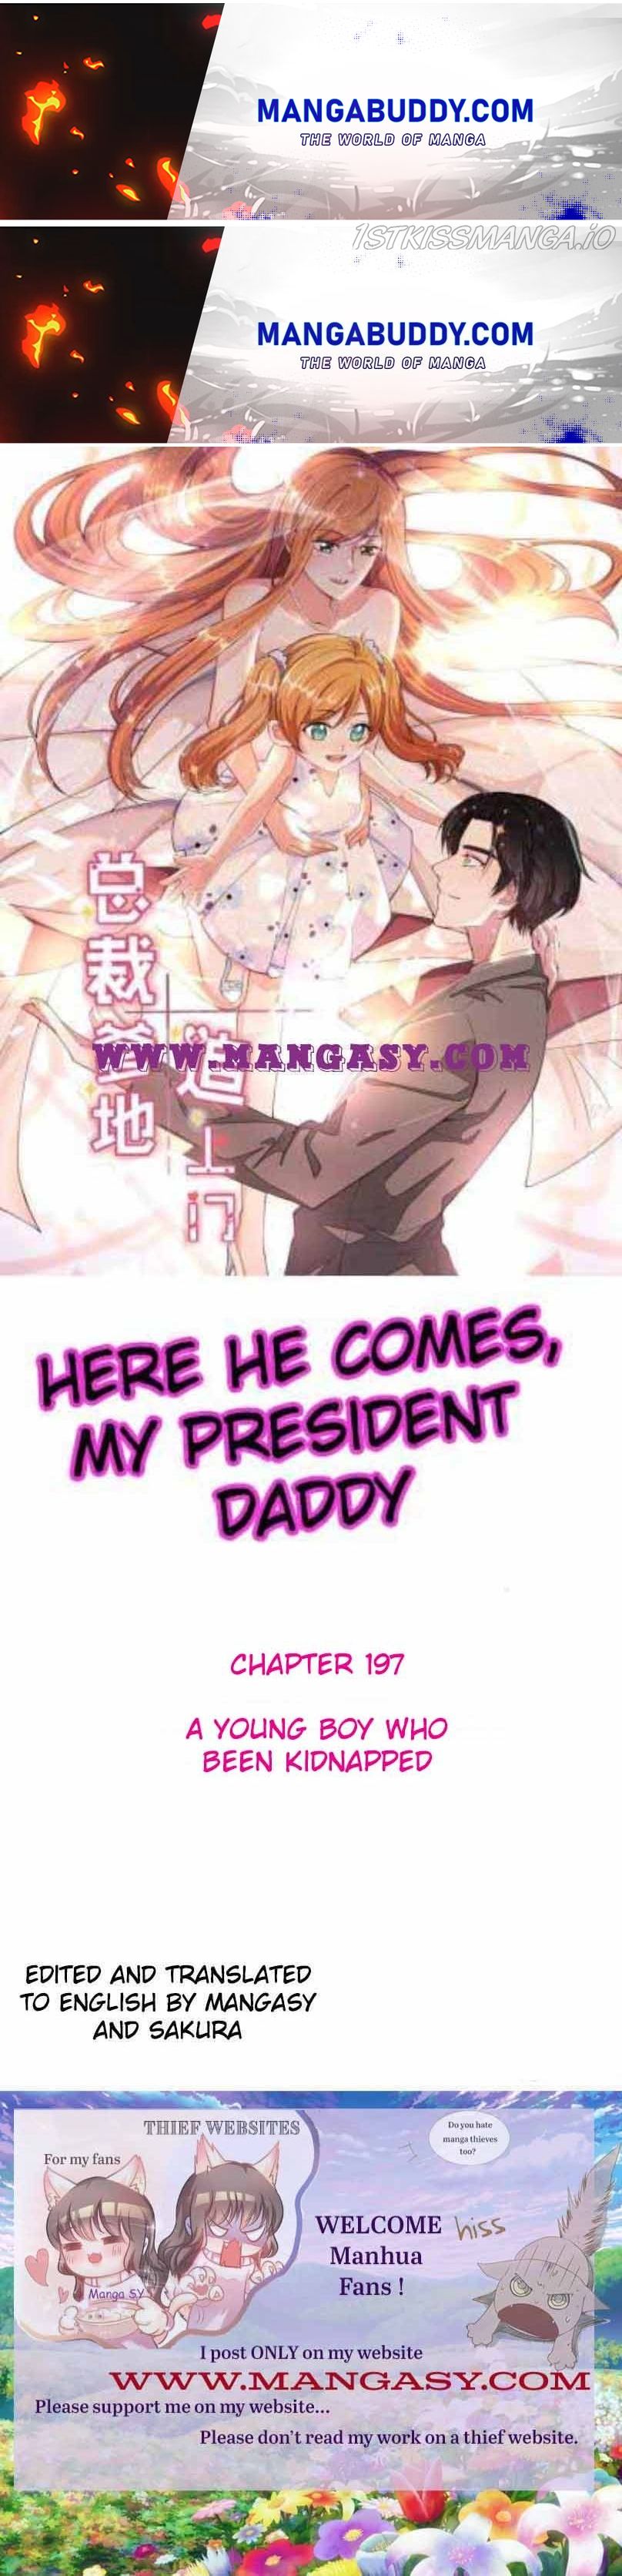 President Daddy Is Chasing You - Page 1